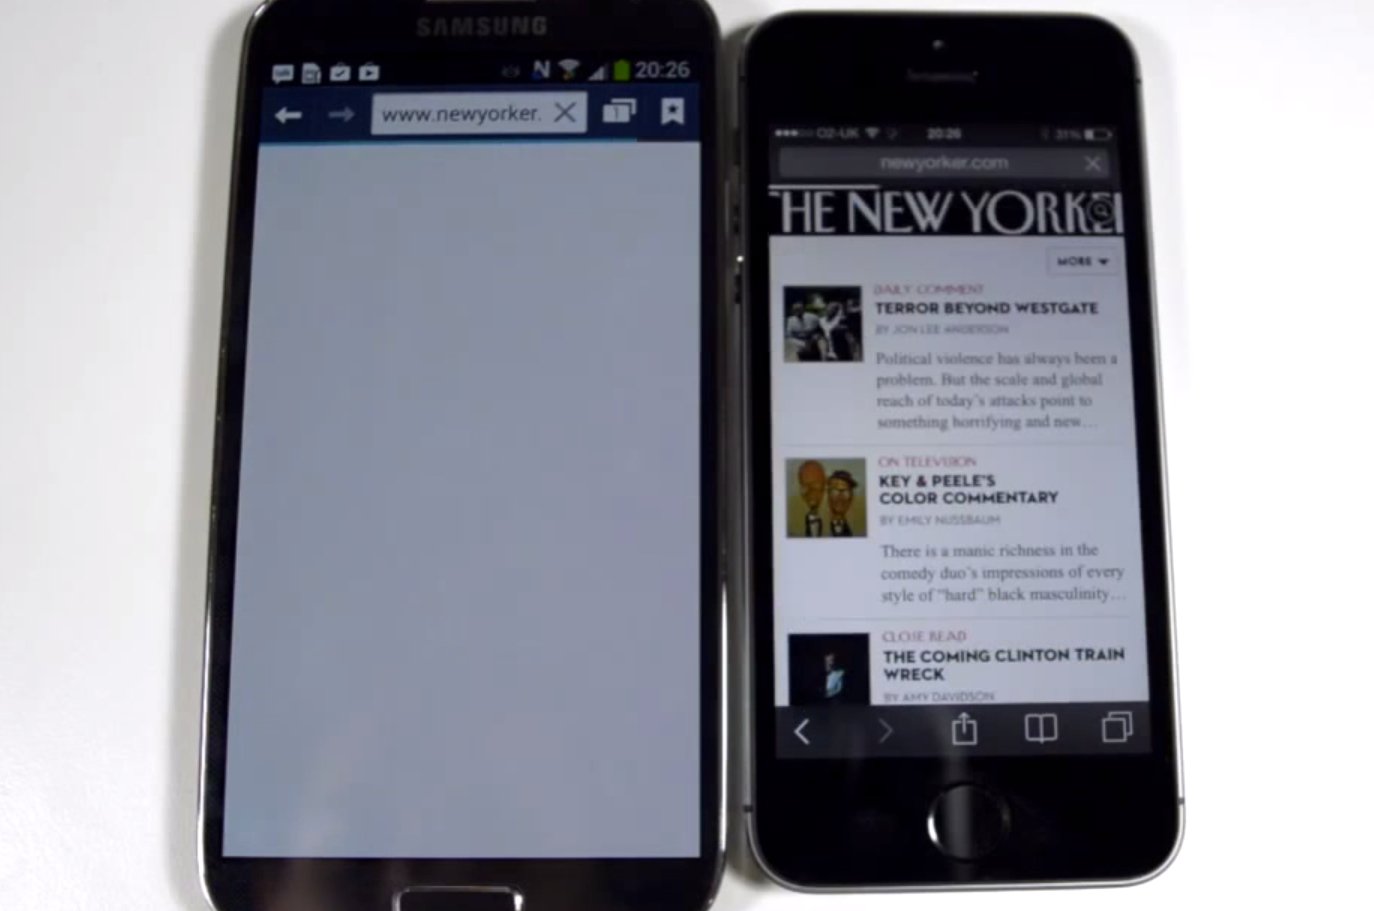 Browser Speed-Test iPhone 5s vs. Samsung Galaxy S4 1